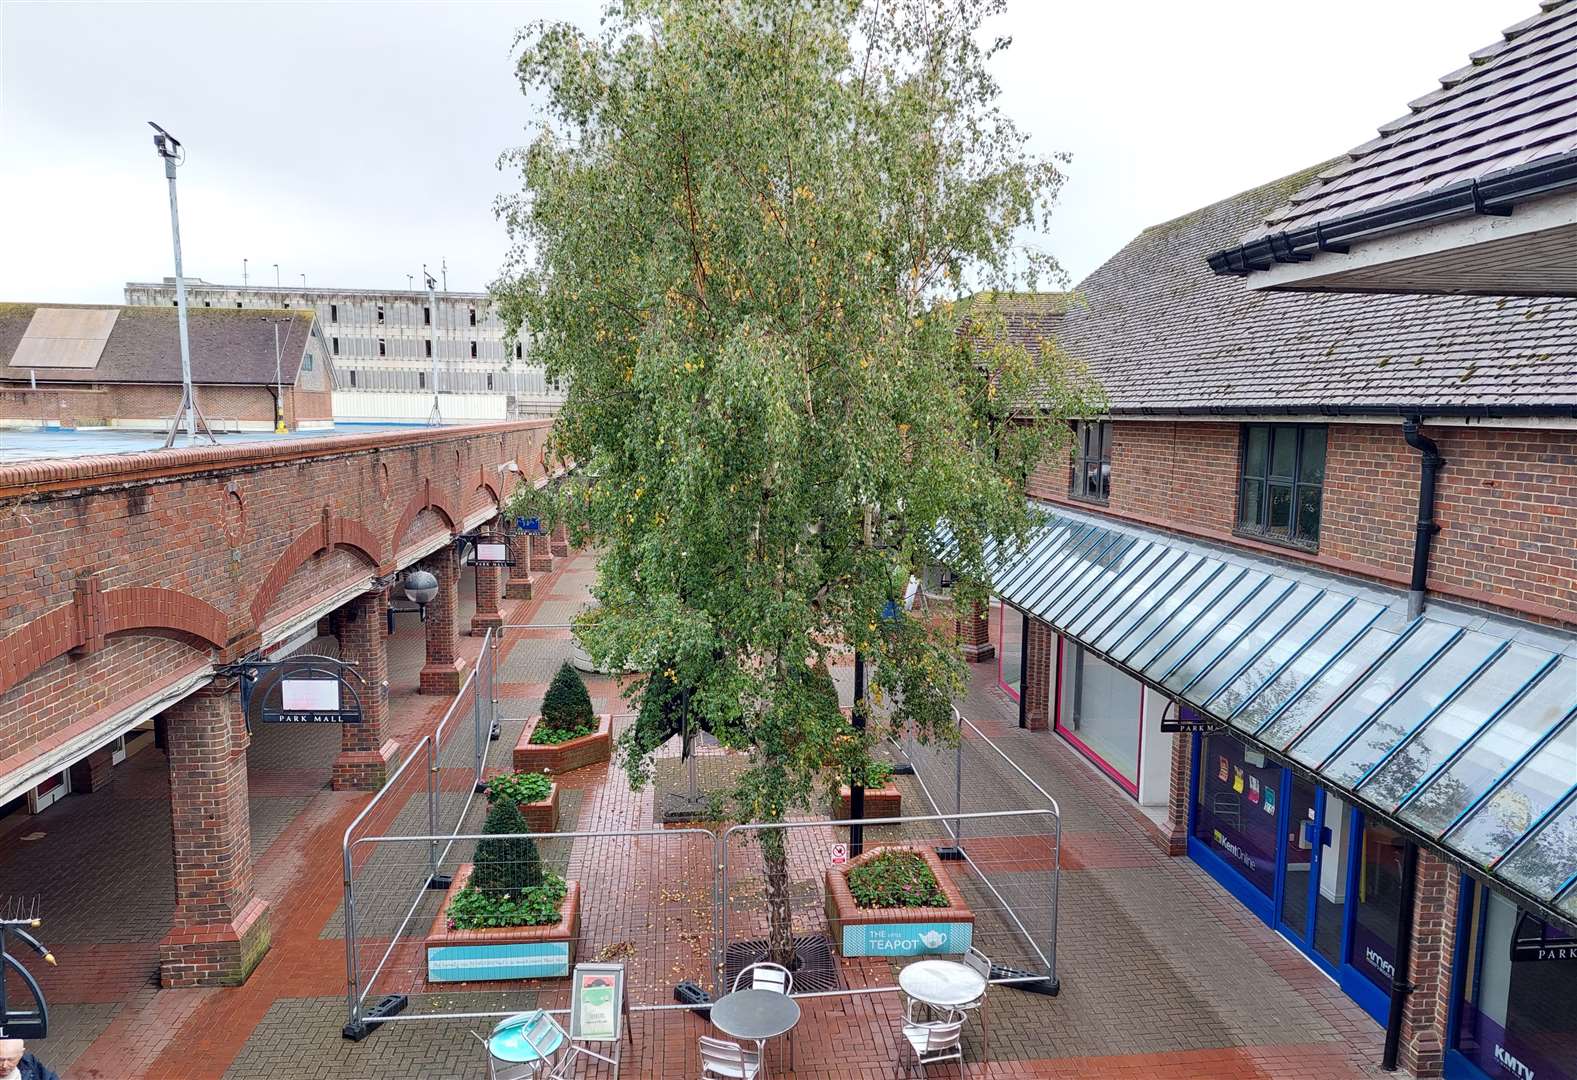 The trees at Park Mall shopping centre in Ashford are being felled for health and safety reasons